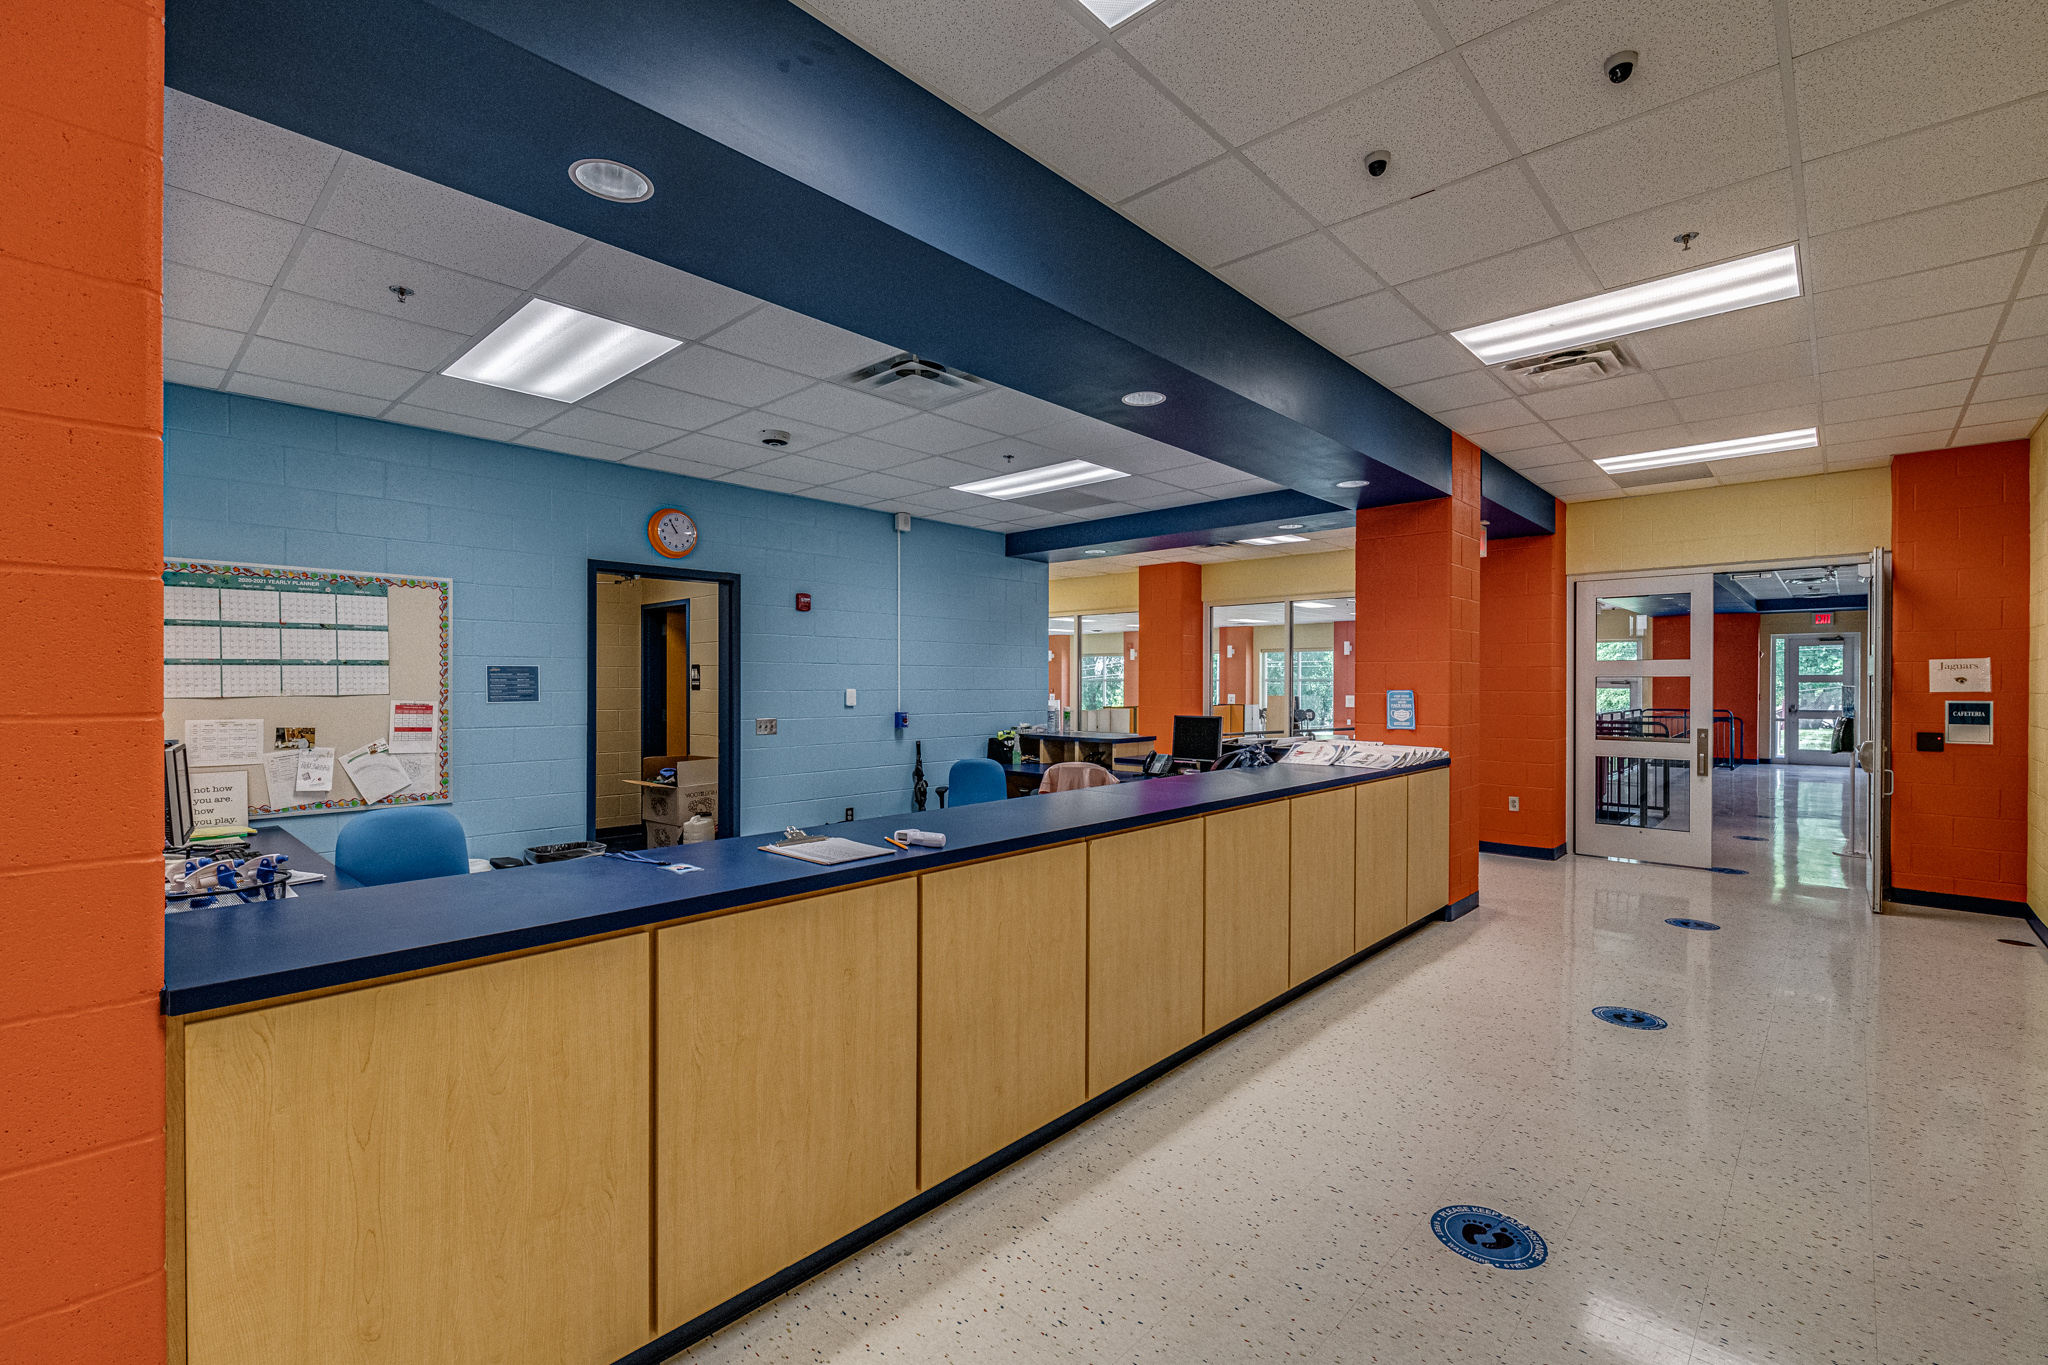 The reception area of the Boys and Girls Club of Cabarrus County